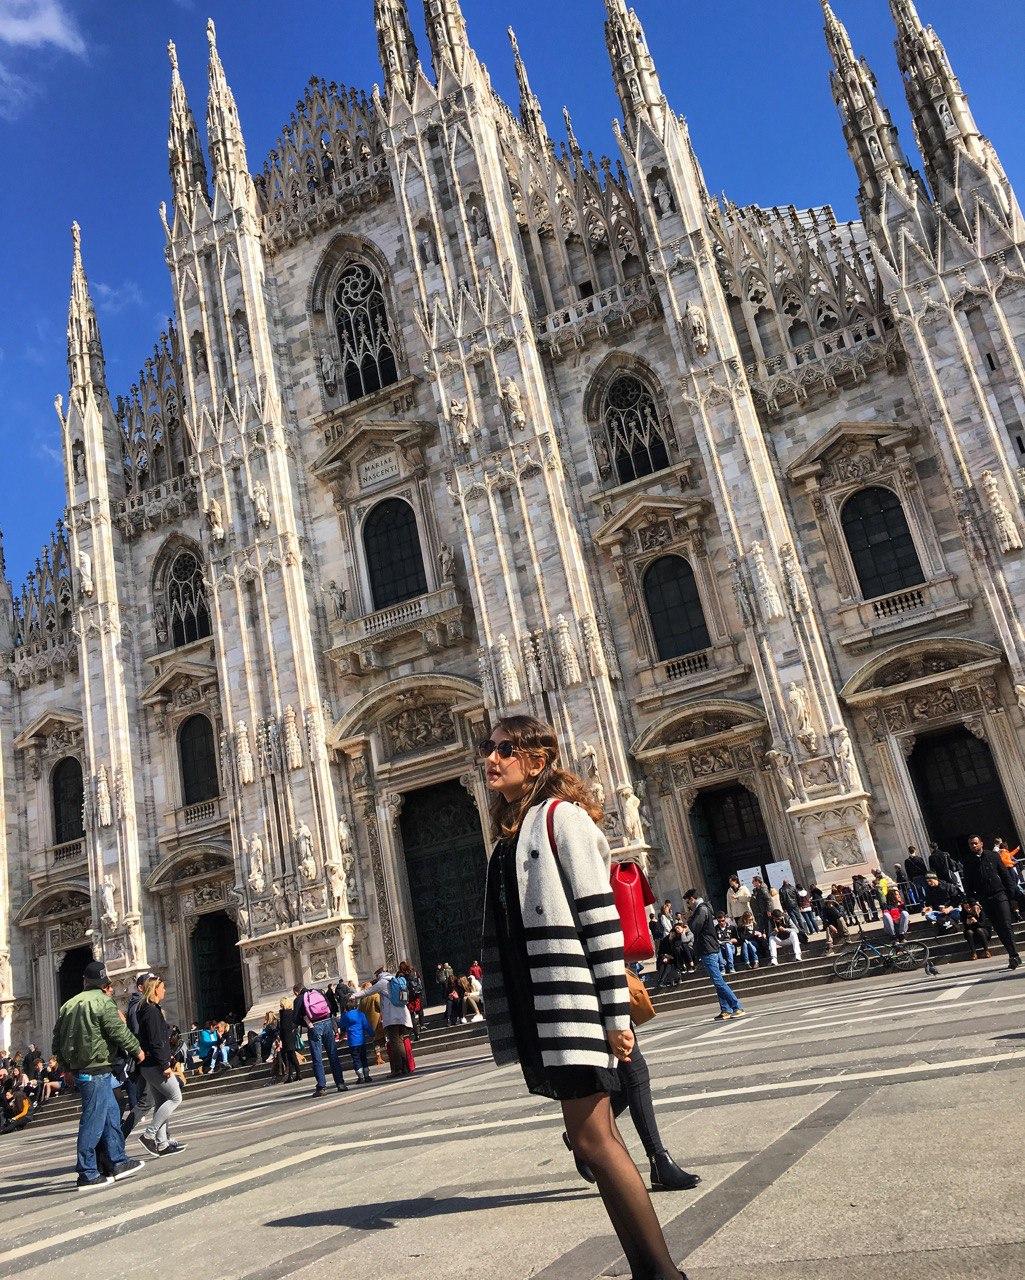 Graduate student at the Duomo Cathedral in Milano, Italy.